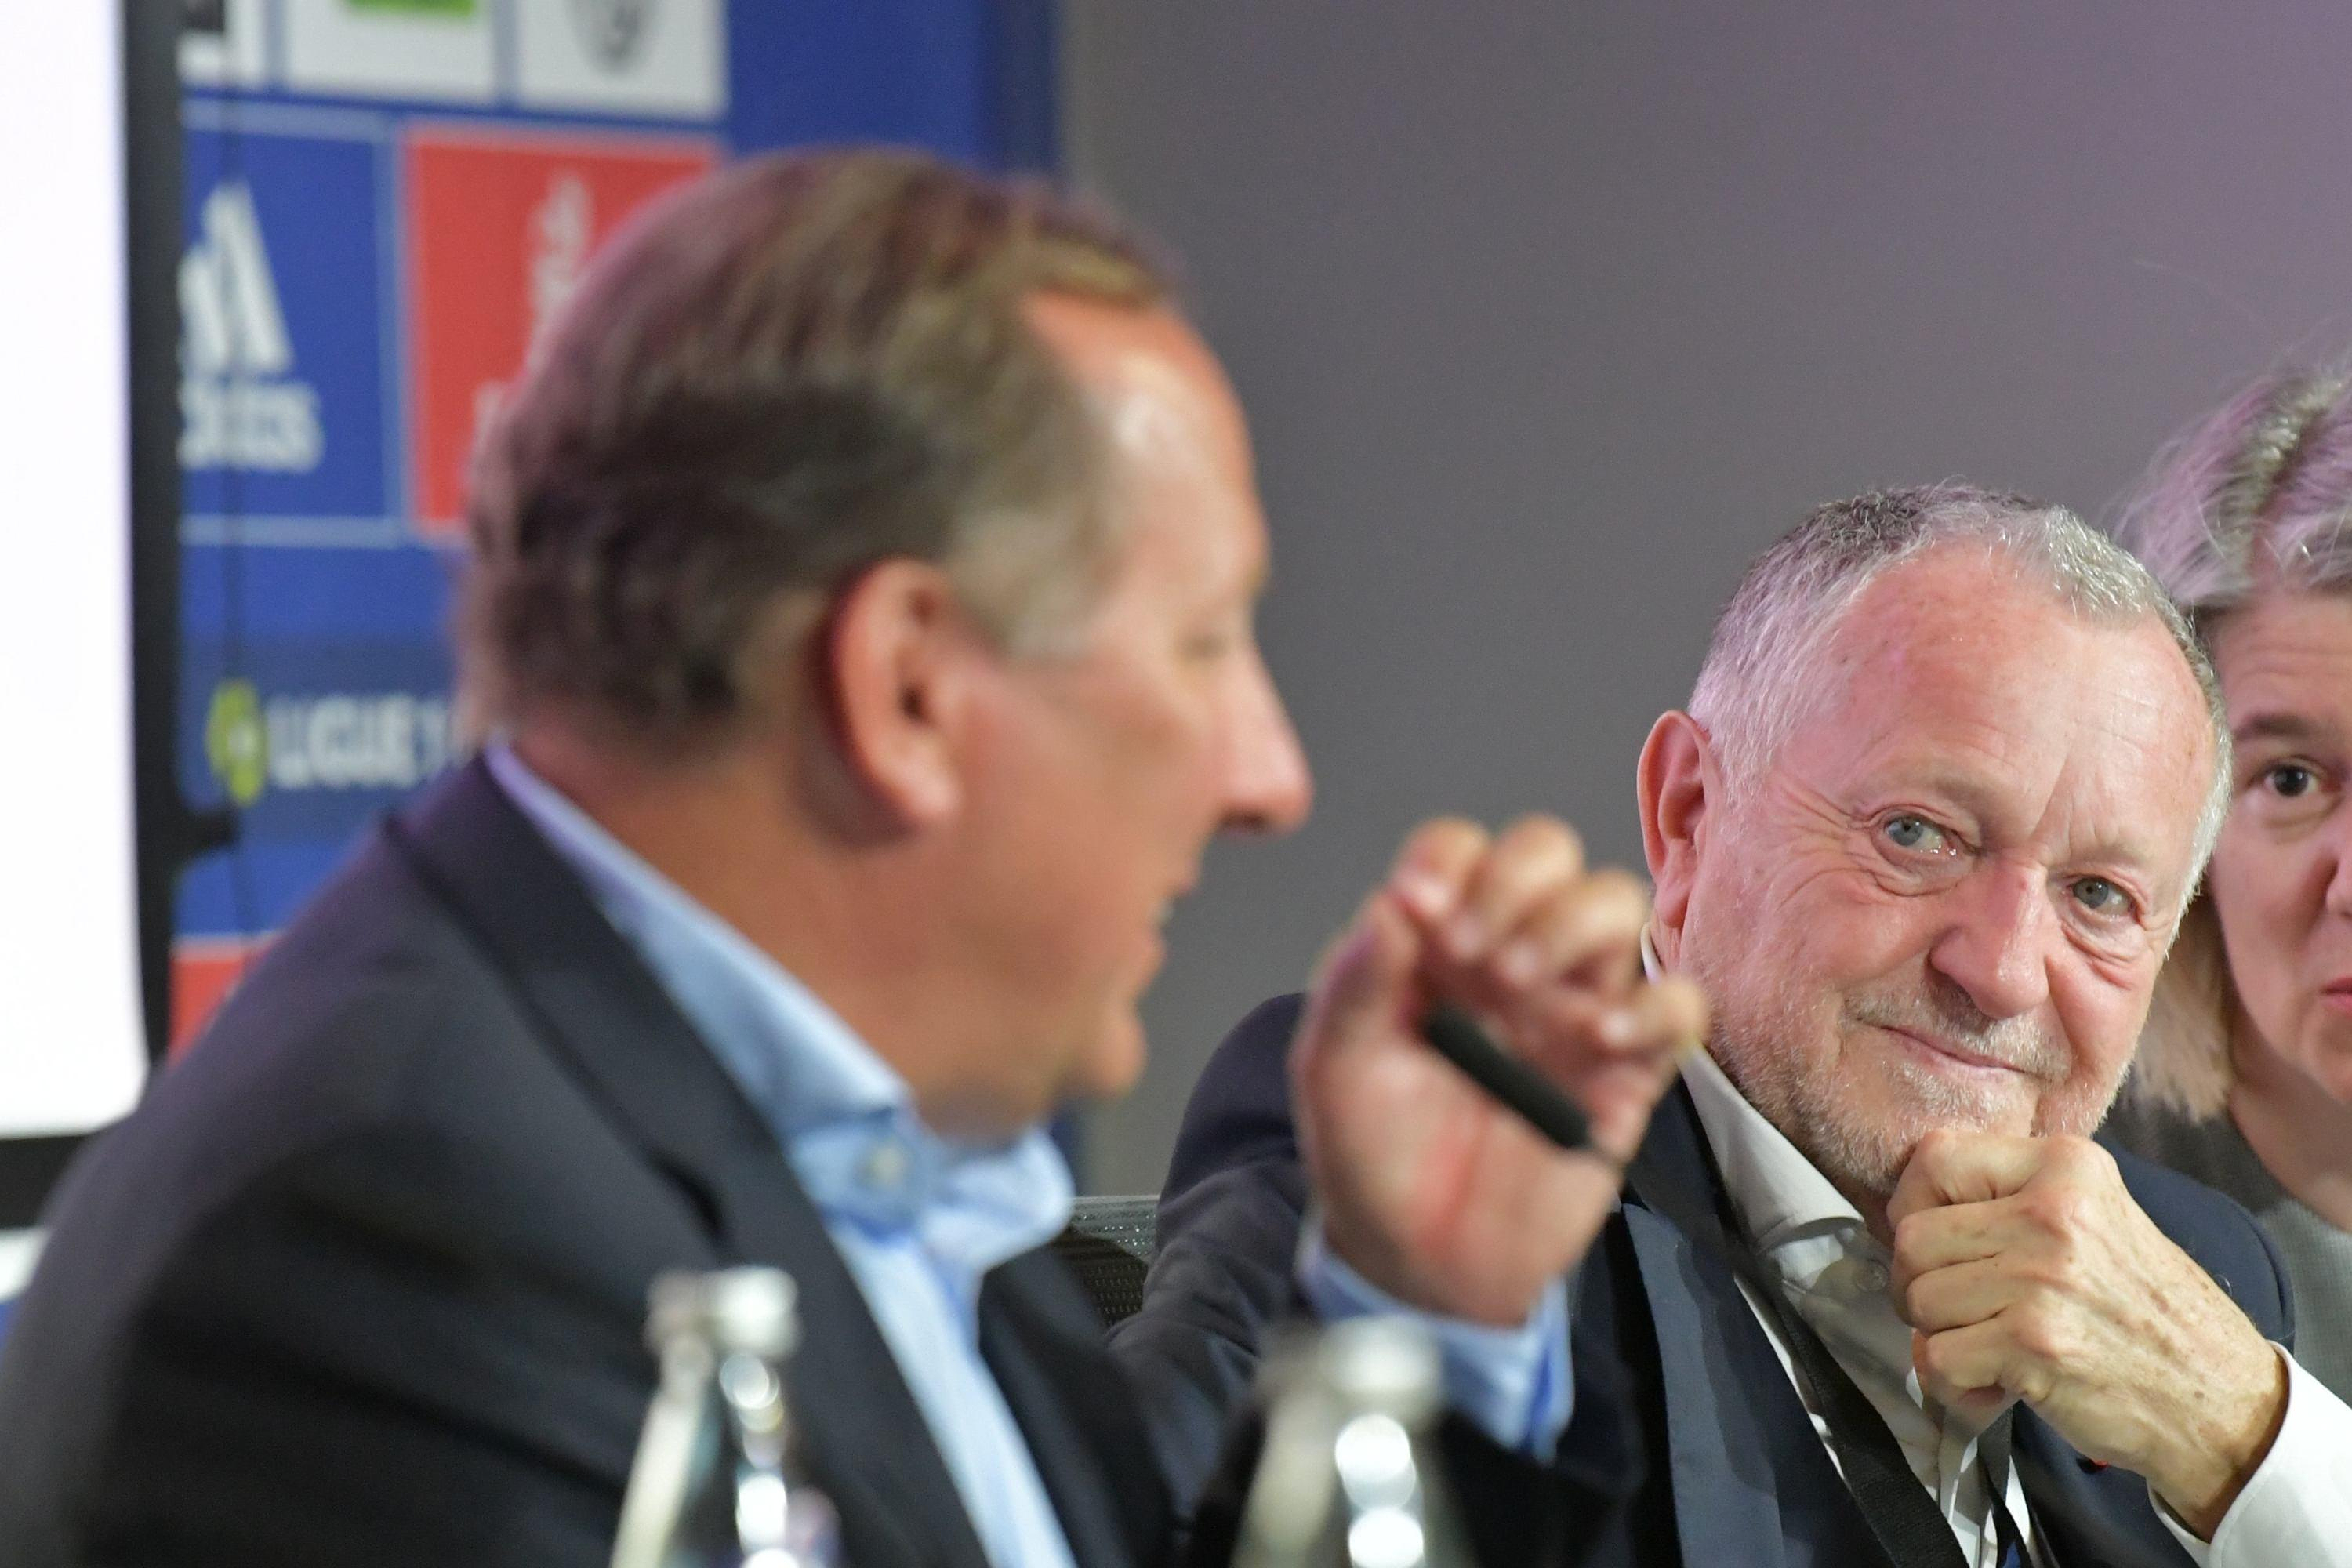 OM-OL - “This is the real beginning of the adventure made by John and Eagle”: Aulas is enthusiastic about OL and compliments Textor